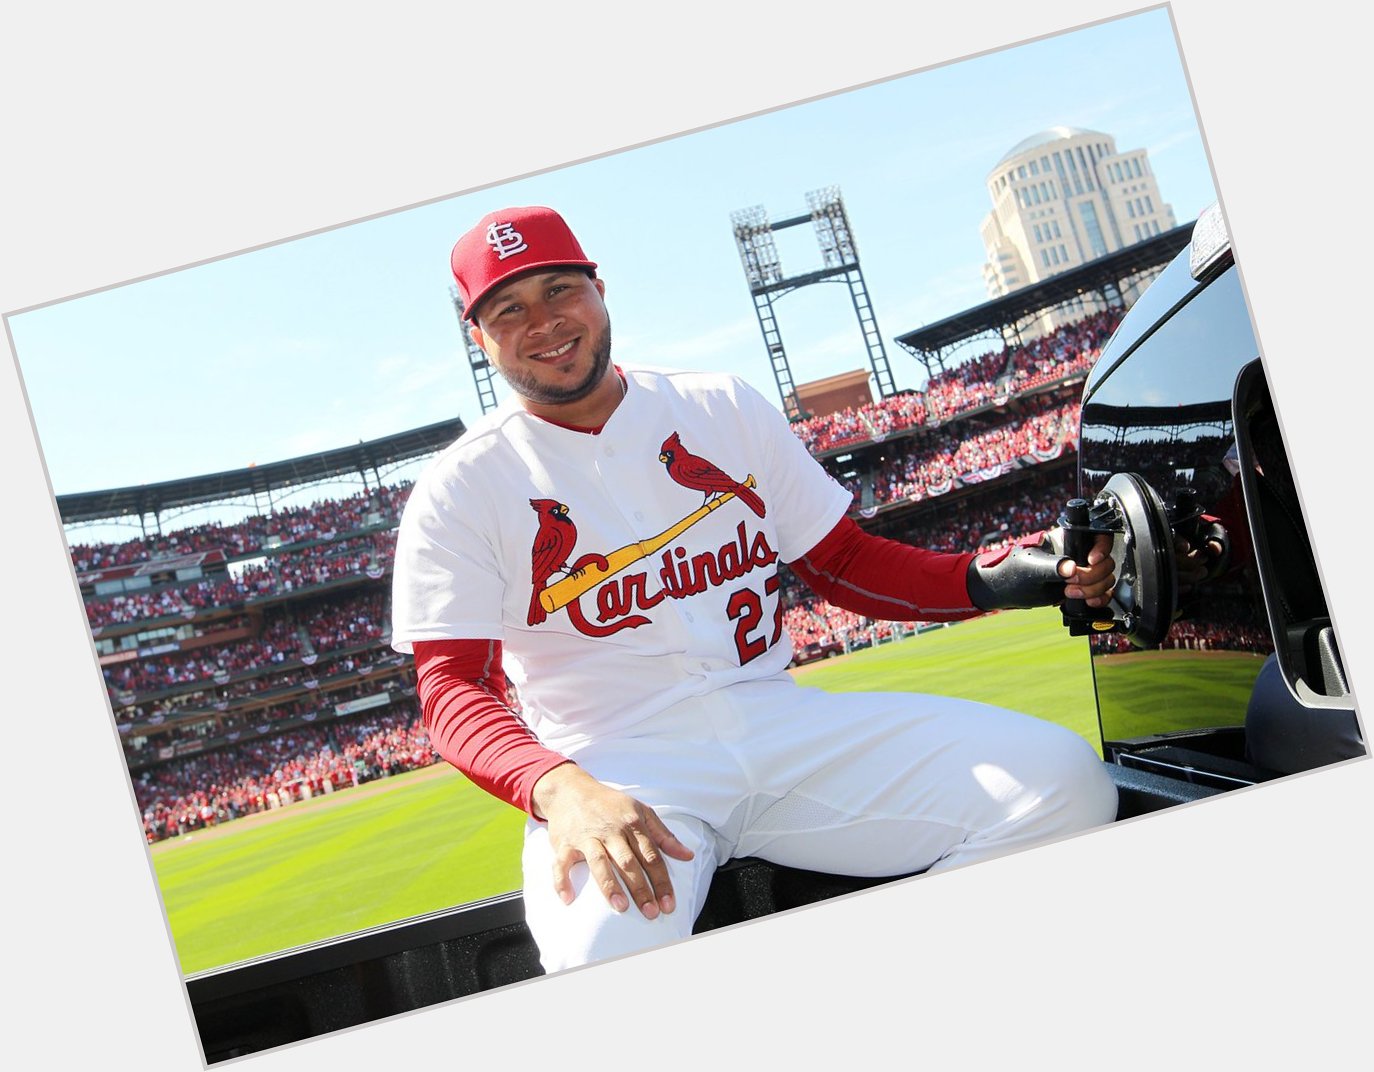 Join us in wishing a Happy 35th Birthday to infielder Jhonny Peralta! 